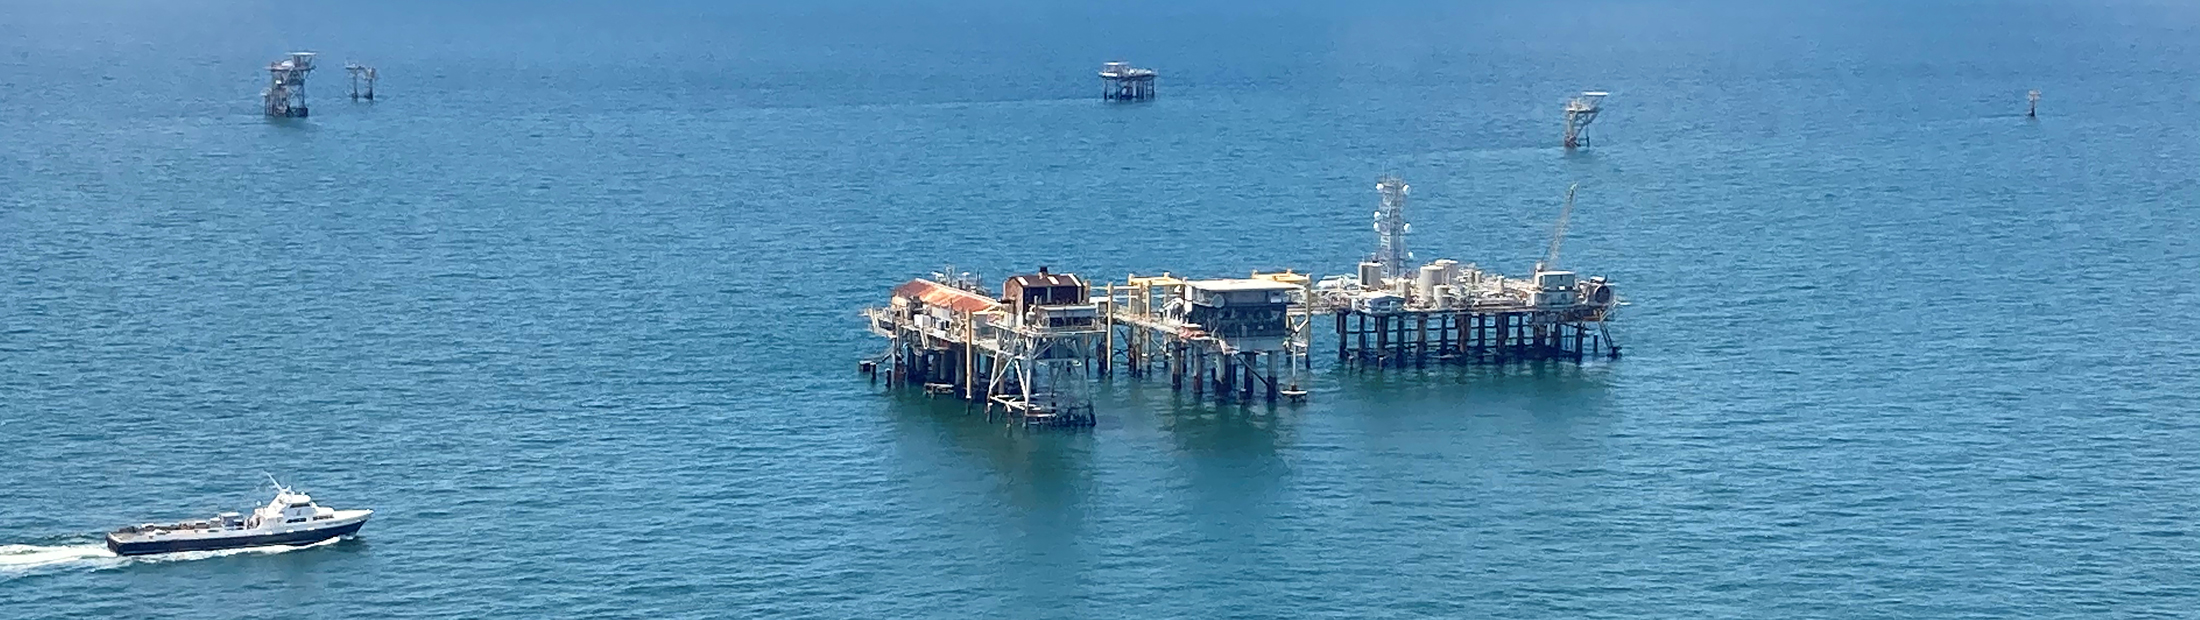 An offshore drilling complex sits over blue water. A large boat is emerging from the left.